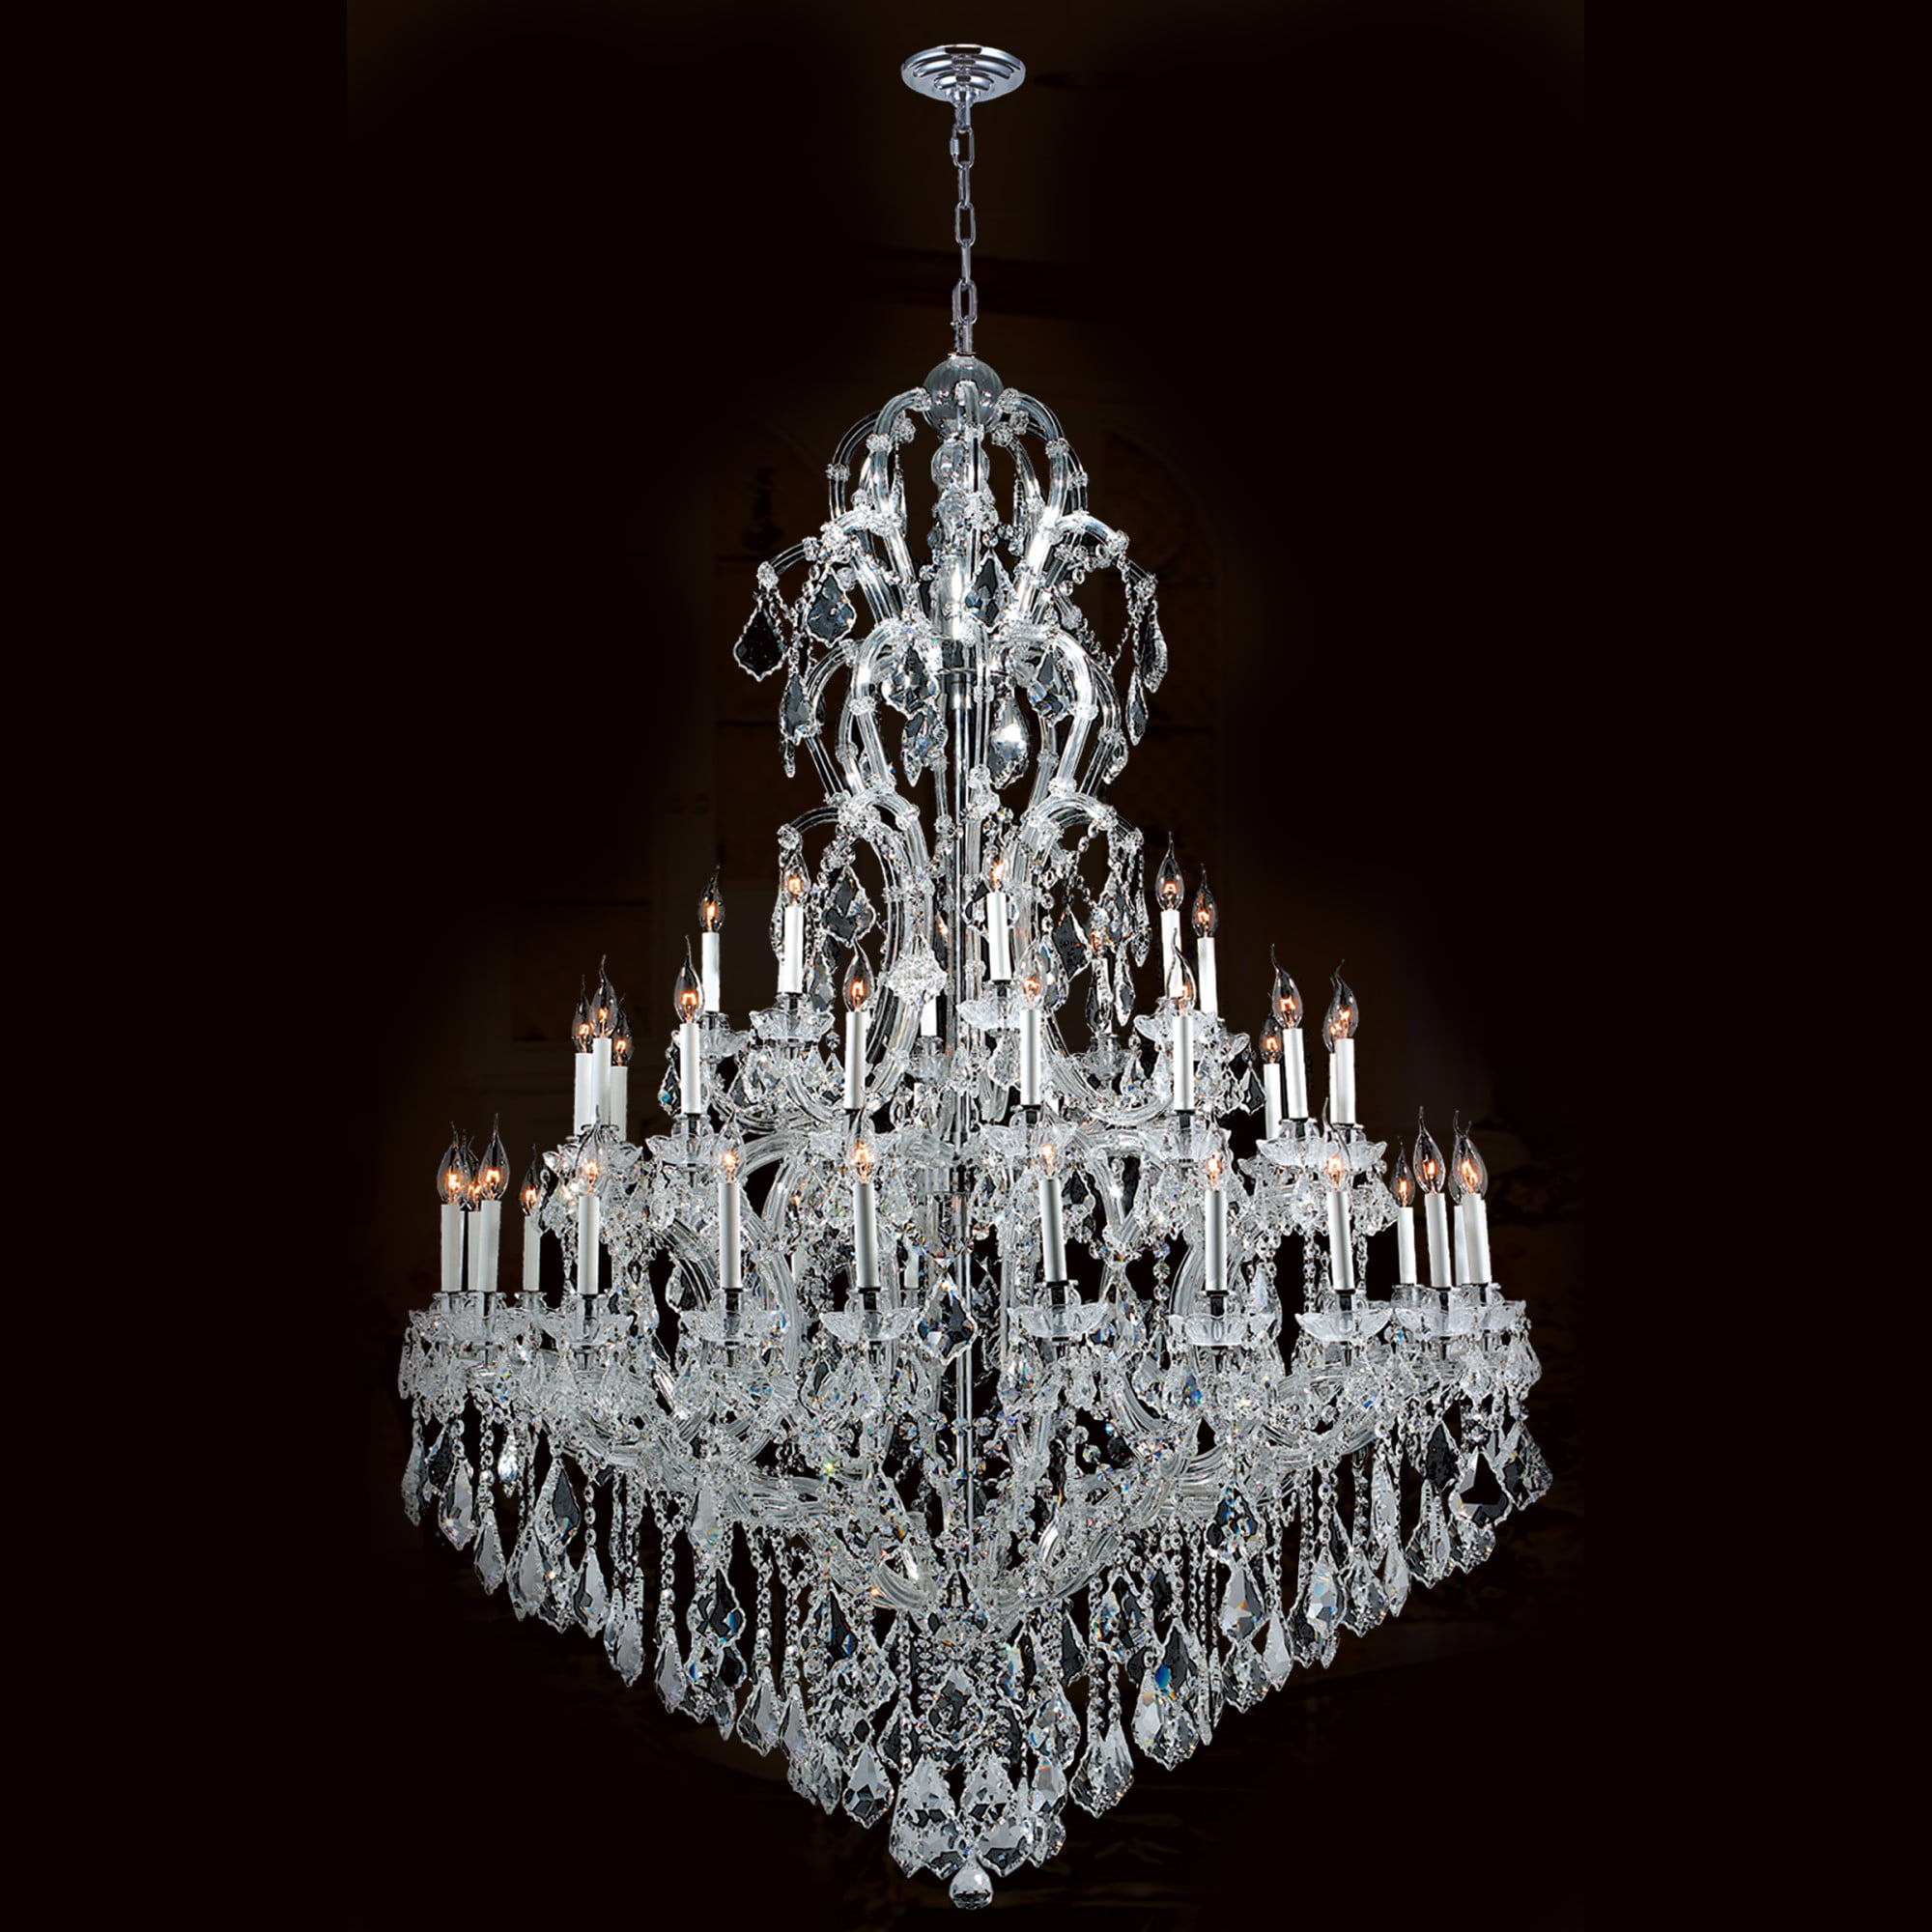 Maria Theresa Collection 48 Light Chrome Finish Crystal Chandelier 52